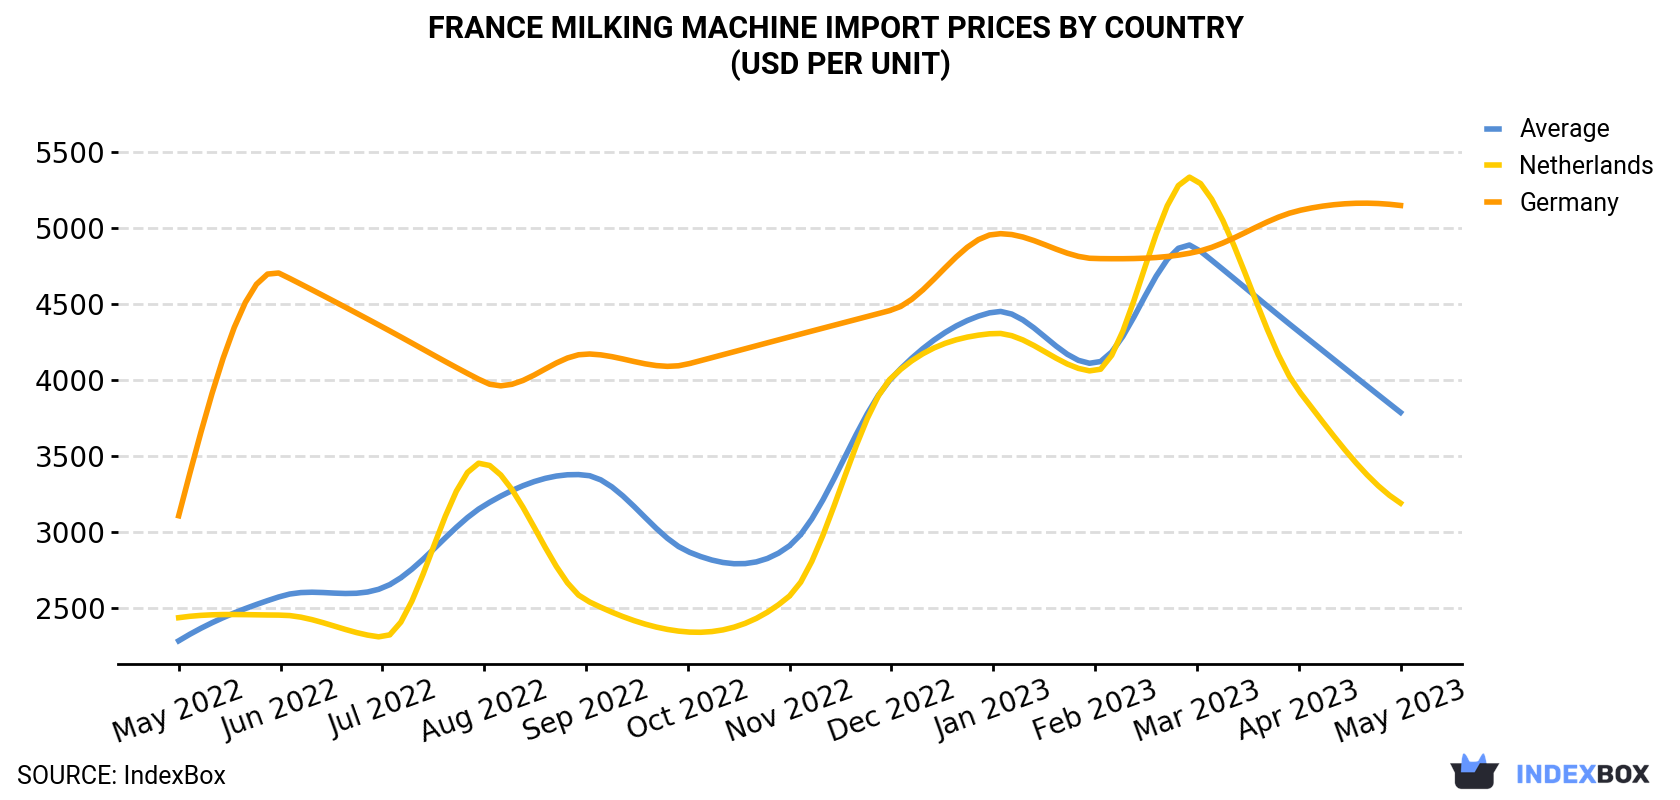 France Milking Machine Import Prices By Country (USD Per Unit)